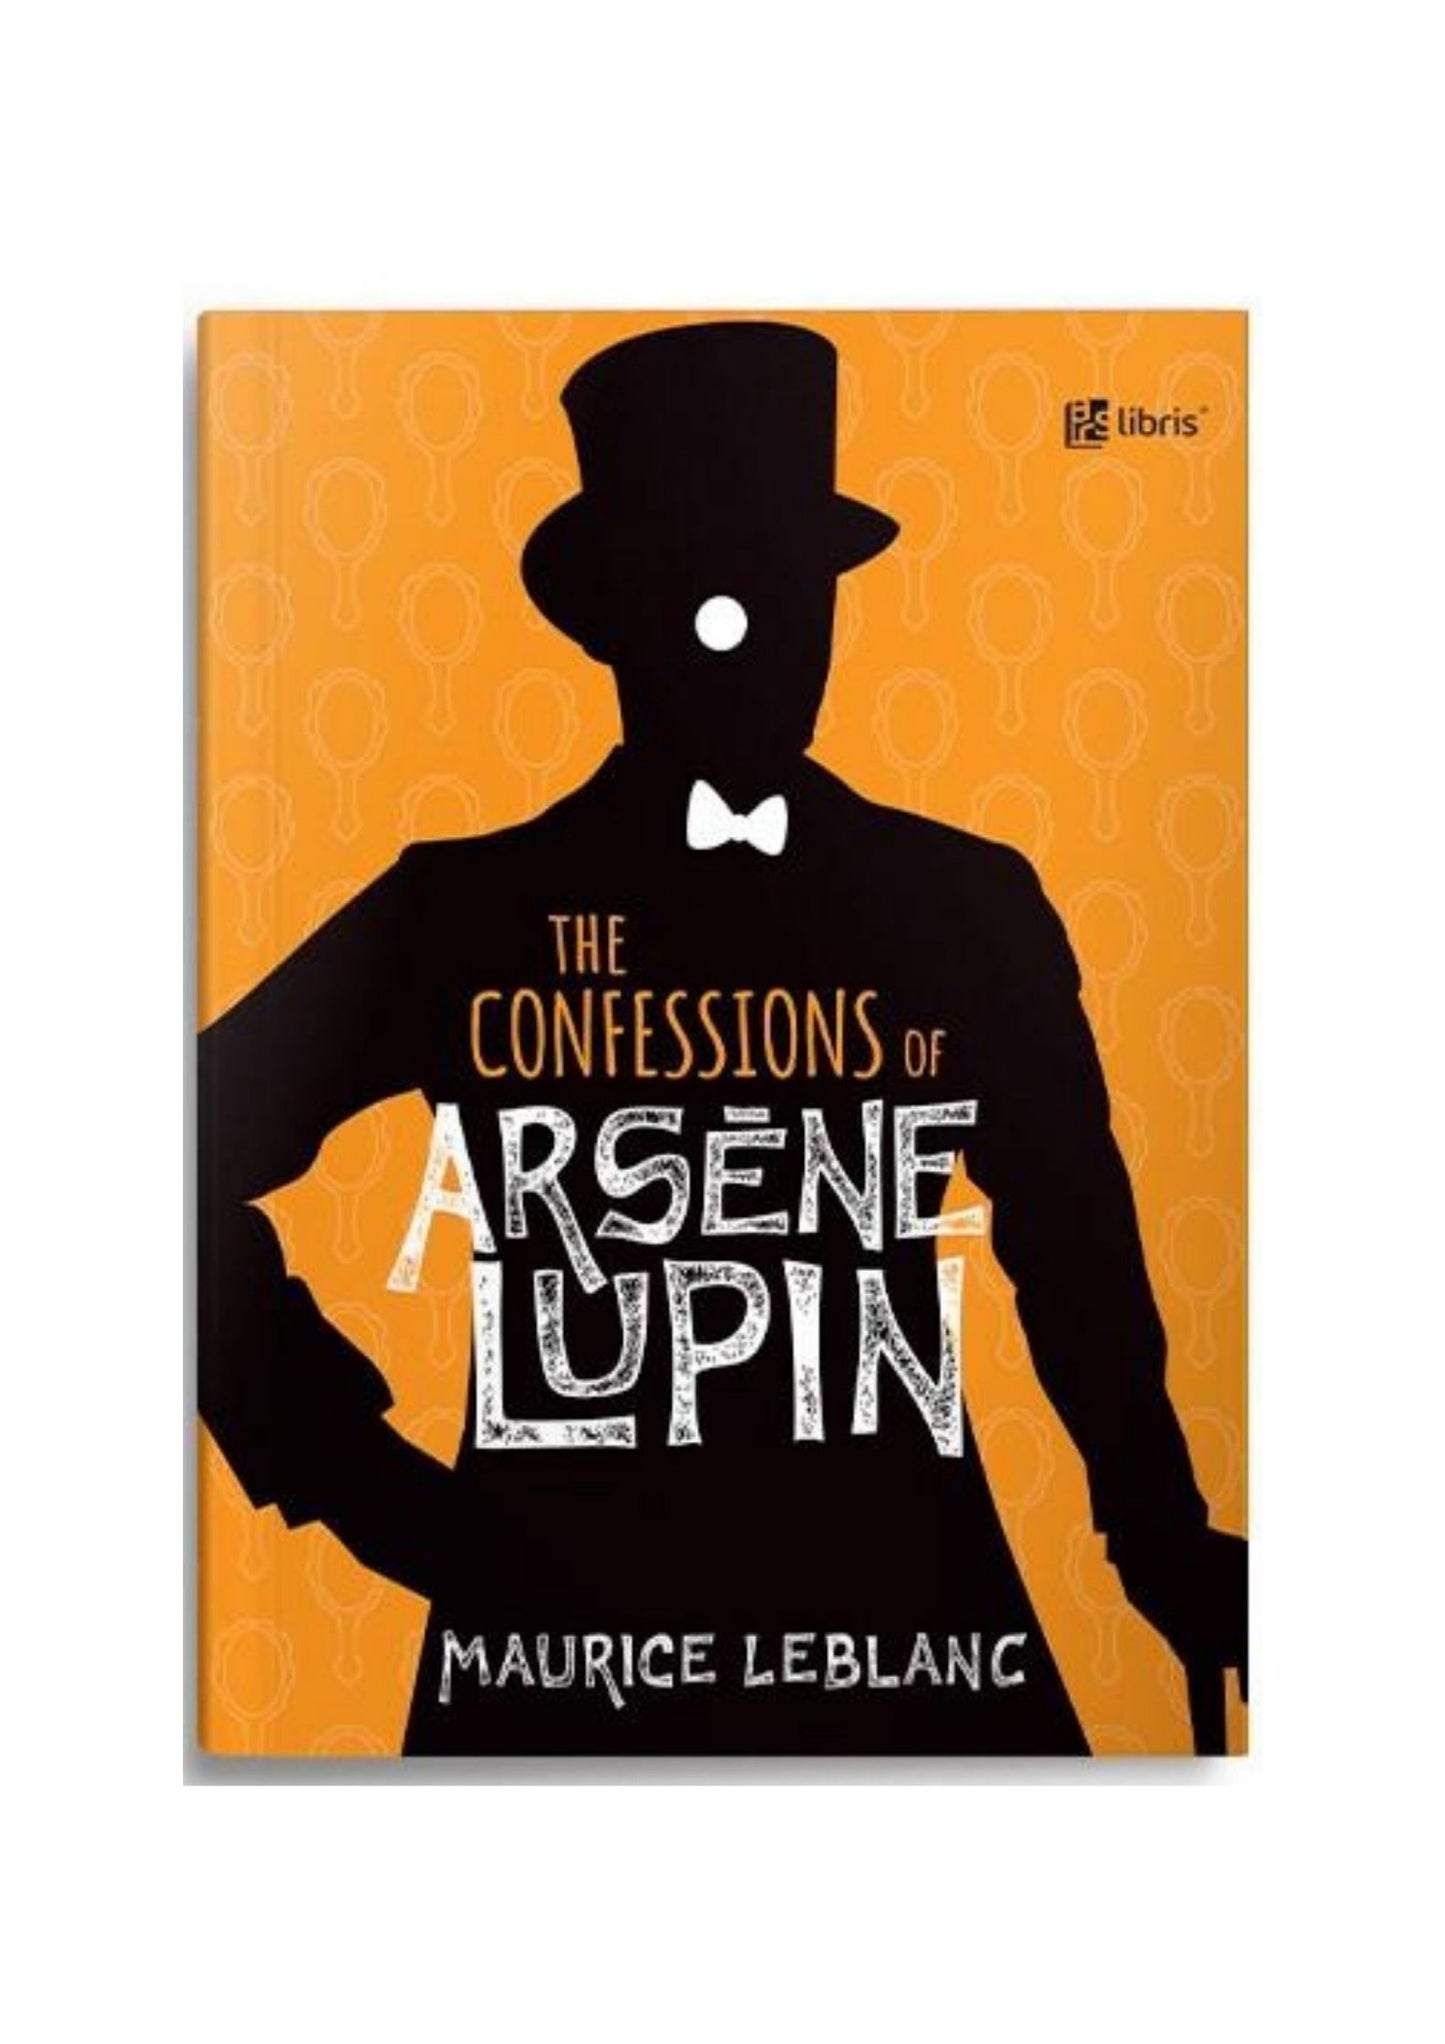 The confessions of Arsène Lupin